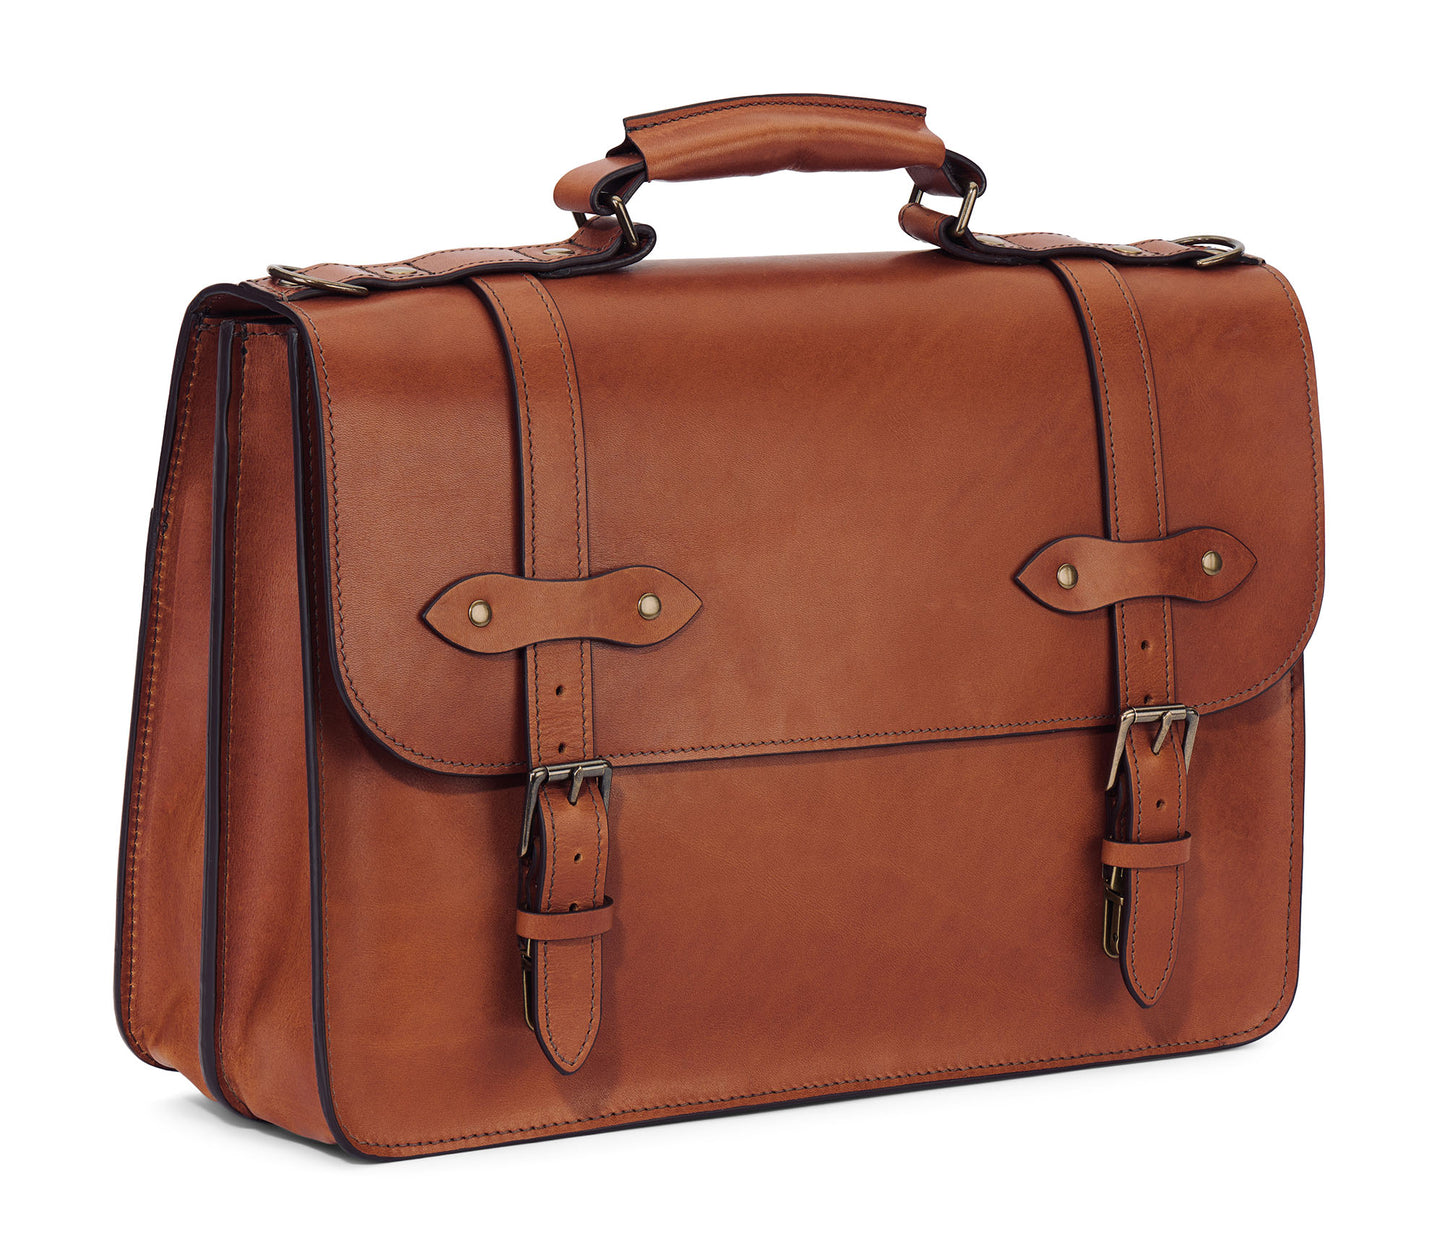 leather lawyers litigator briefcase made of full grain leather in saddle tan color